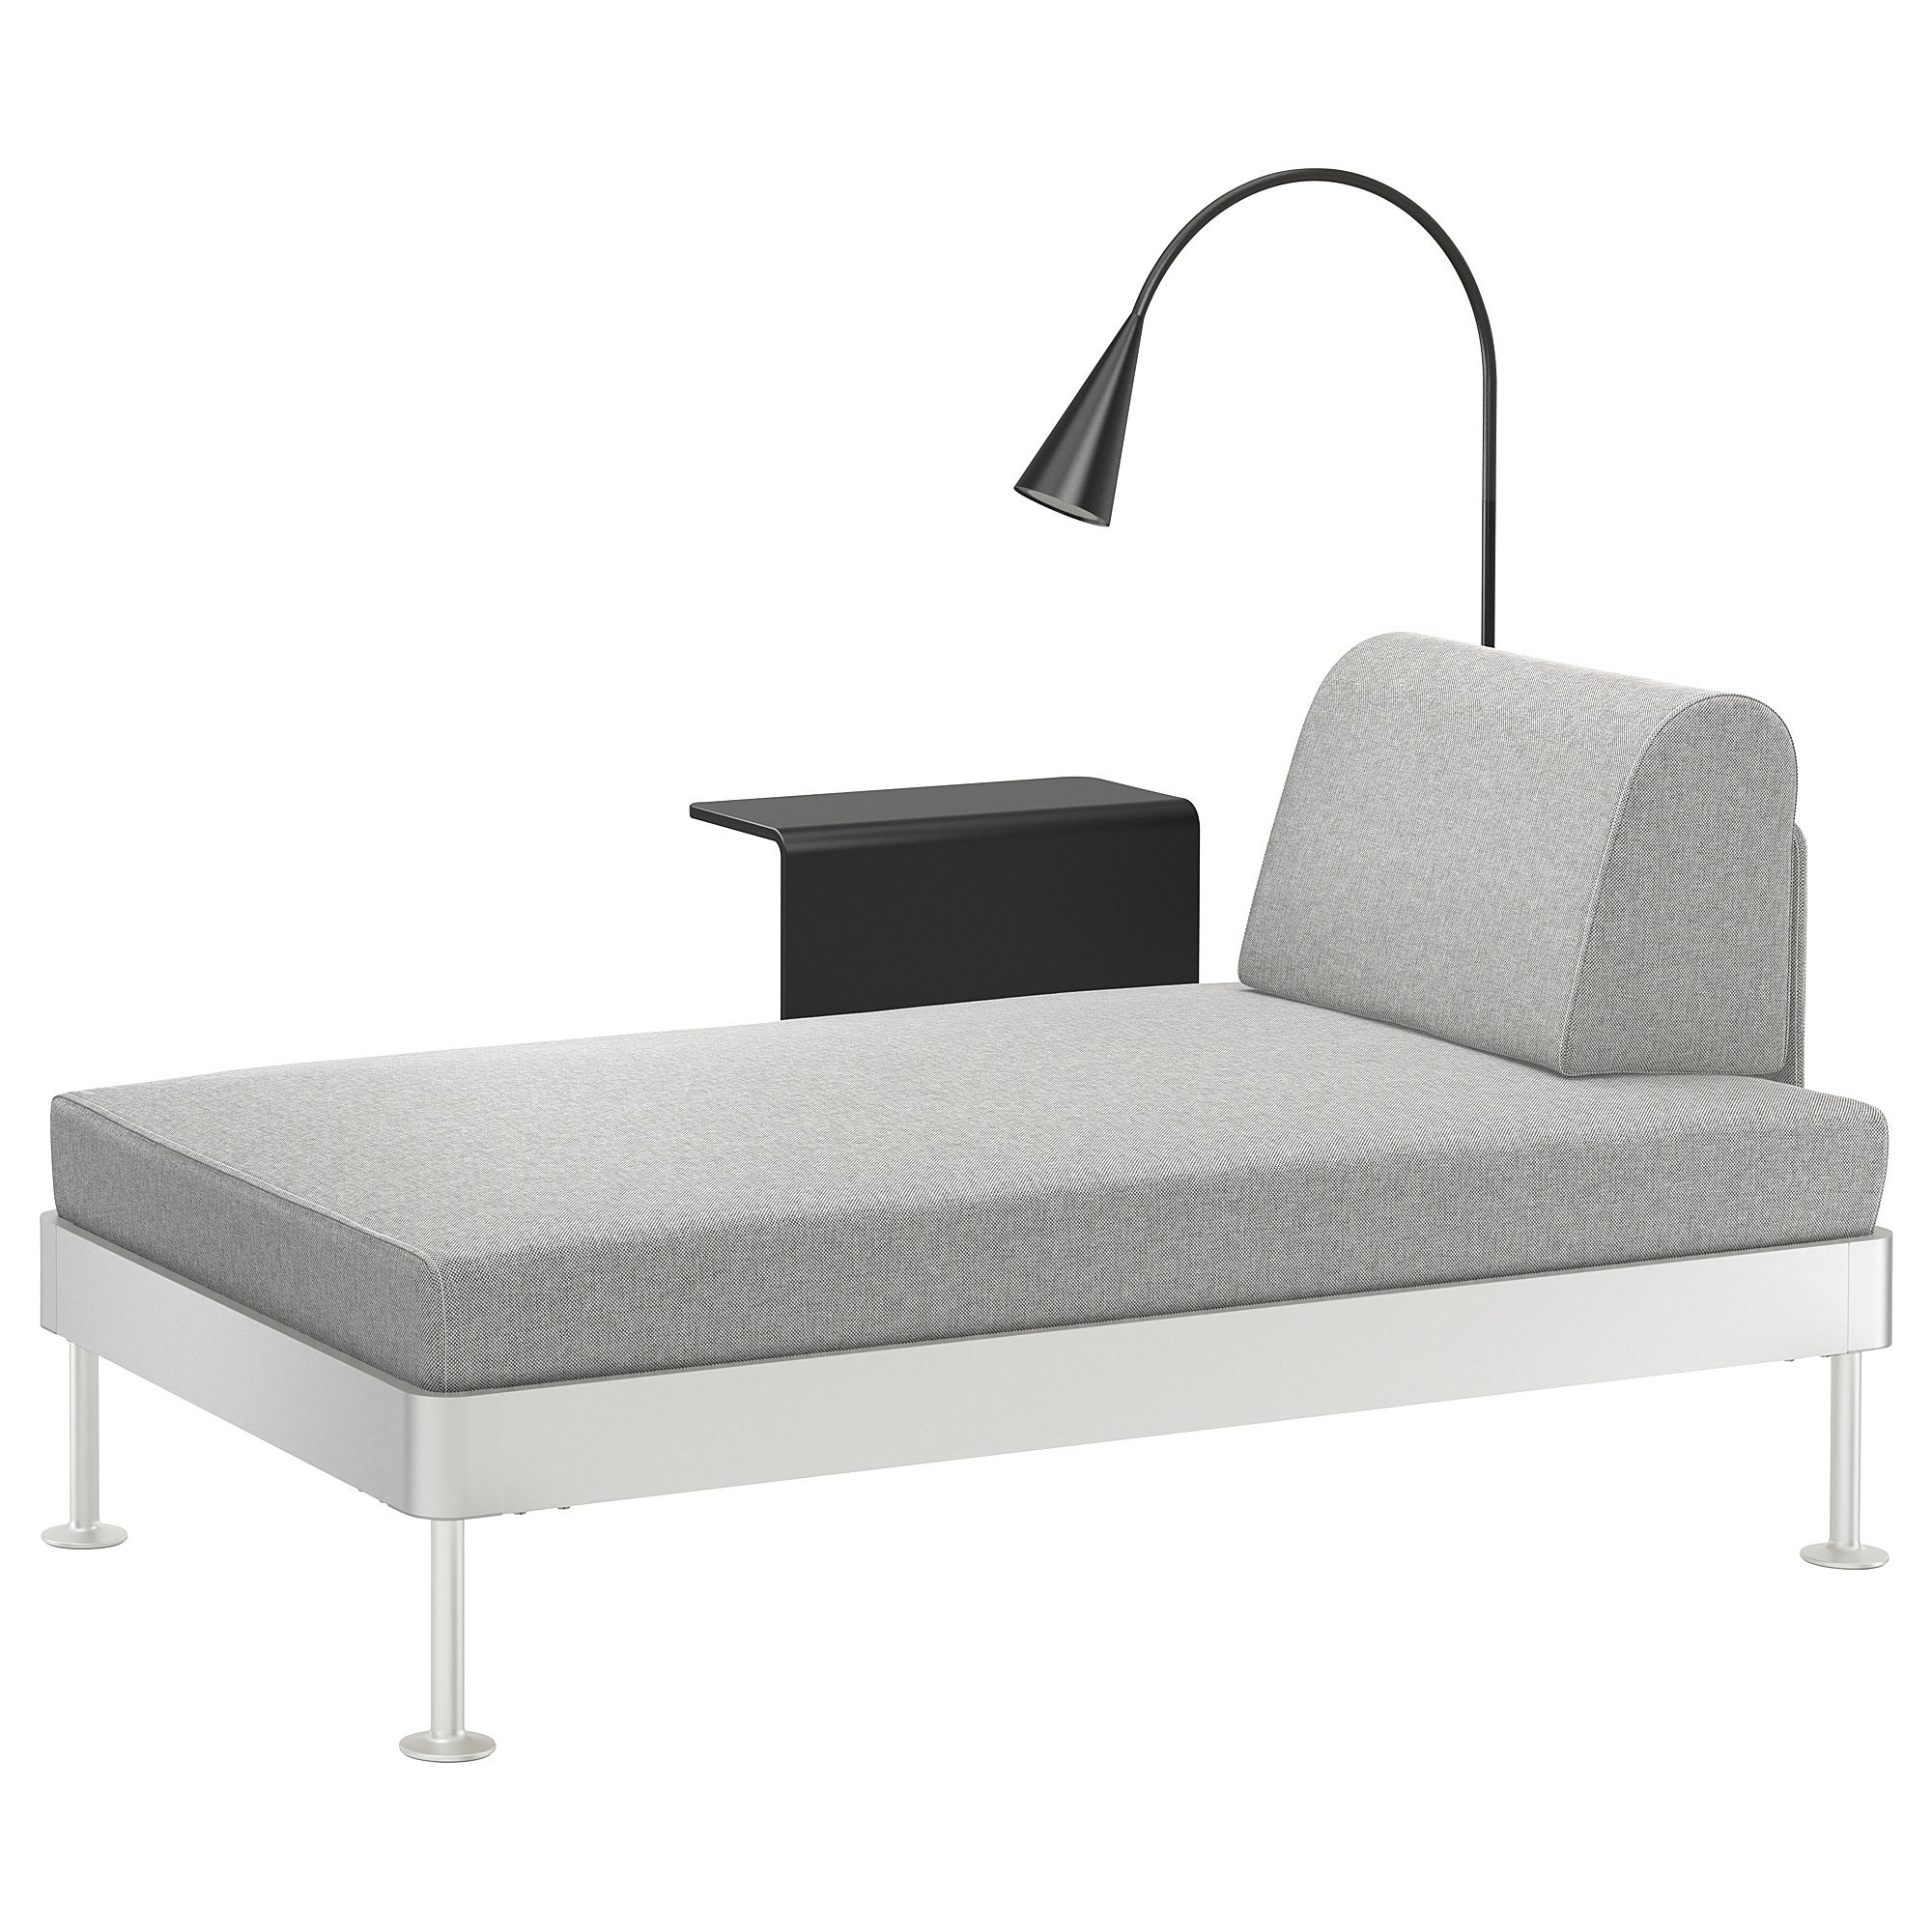 Delaktig Chaise Longue W Side Table And Lamp Tallmyra White/black With Regard To Trendy Ikea Chaise Longues (View 8 of 15)